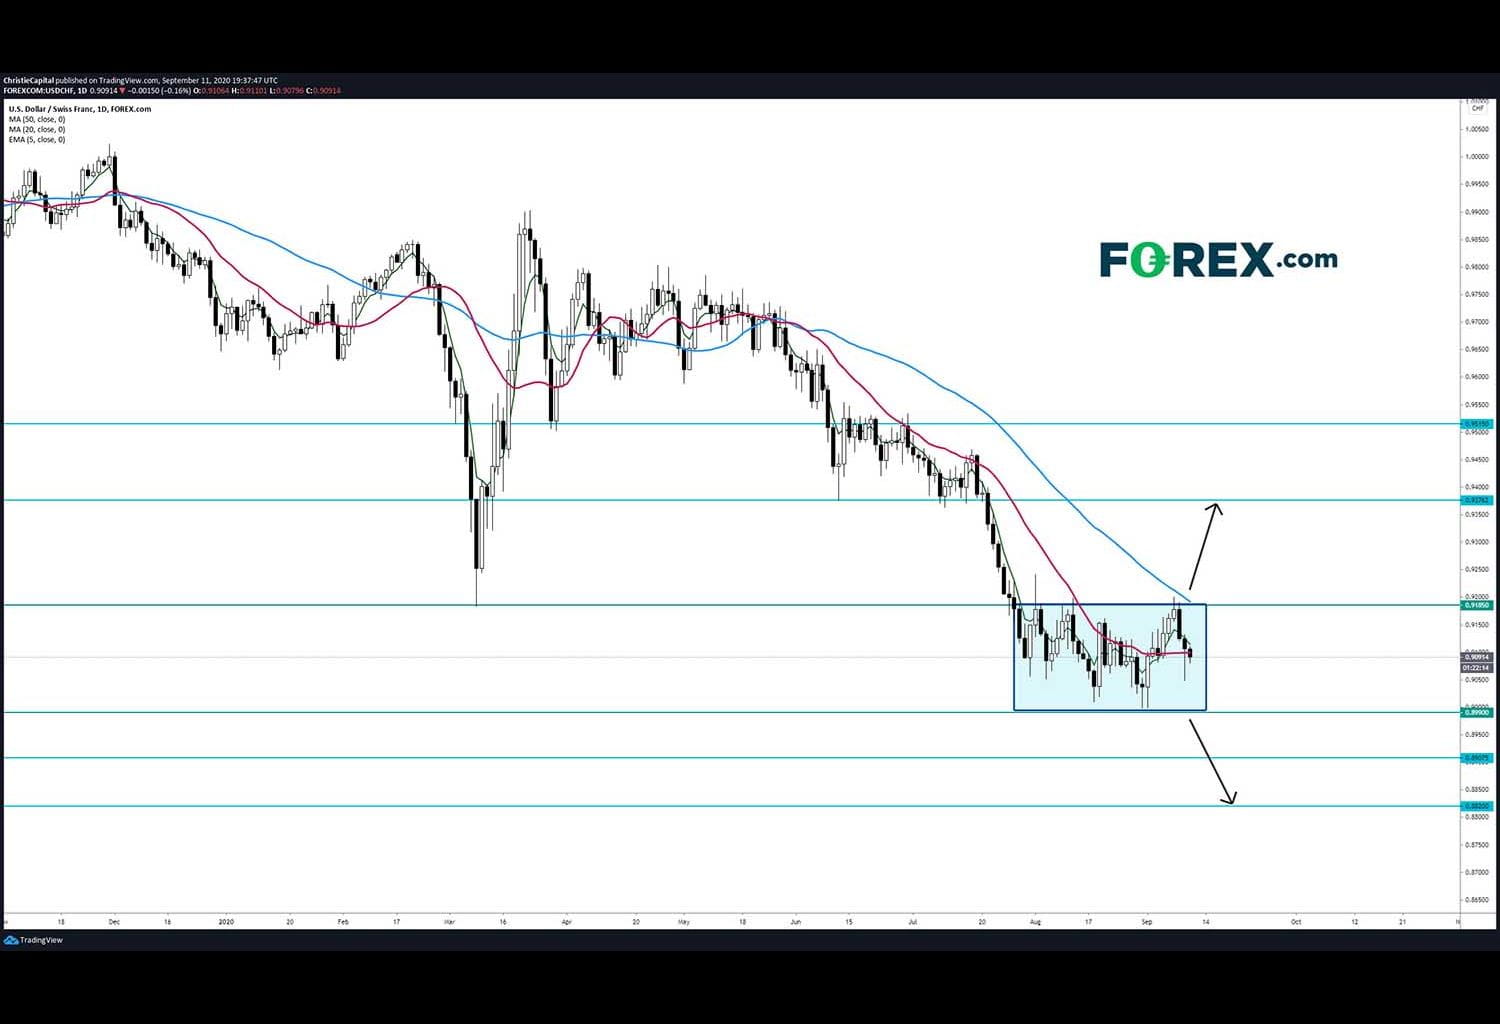 Chart analysis of US Dollar(USD) to Swiss Francs(CHF). Published in September 2020 by FOREX.com